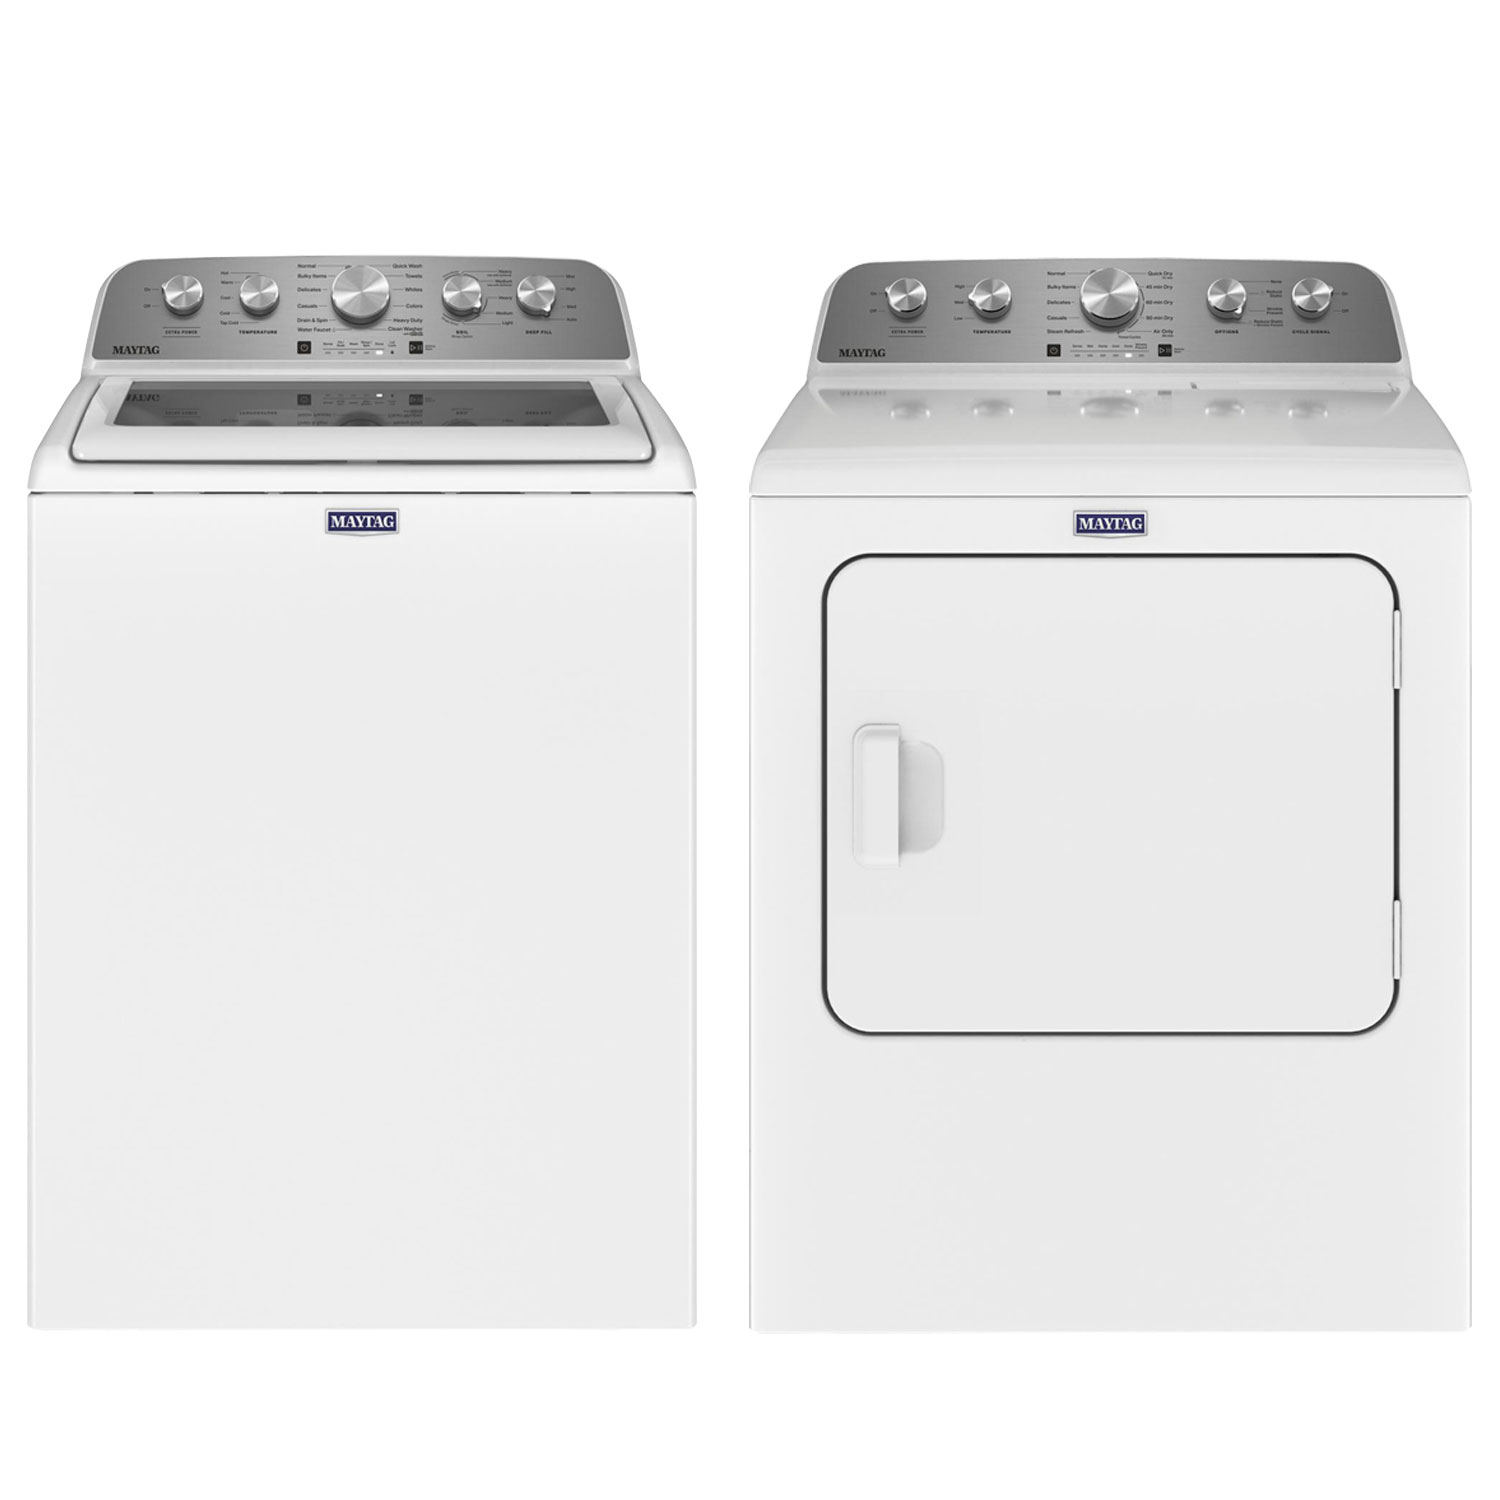 Maytag 5.5 Cu. Ft. High Efficiency Top Load Washer & 7.0 Cu. Ft. Electric Steam Dryer - White